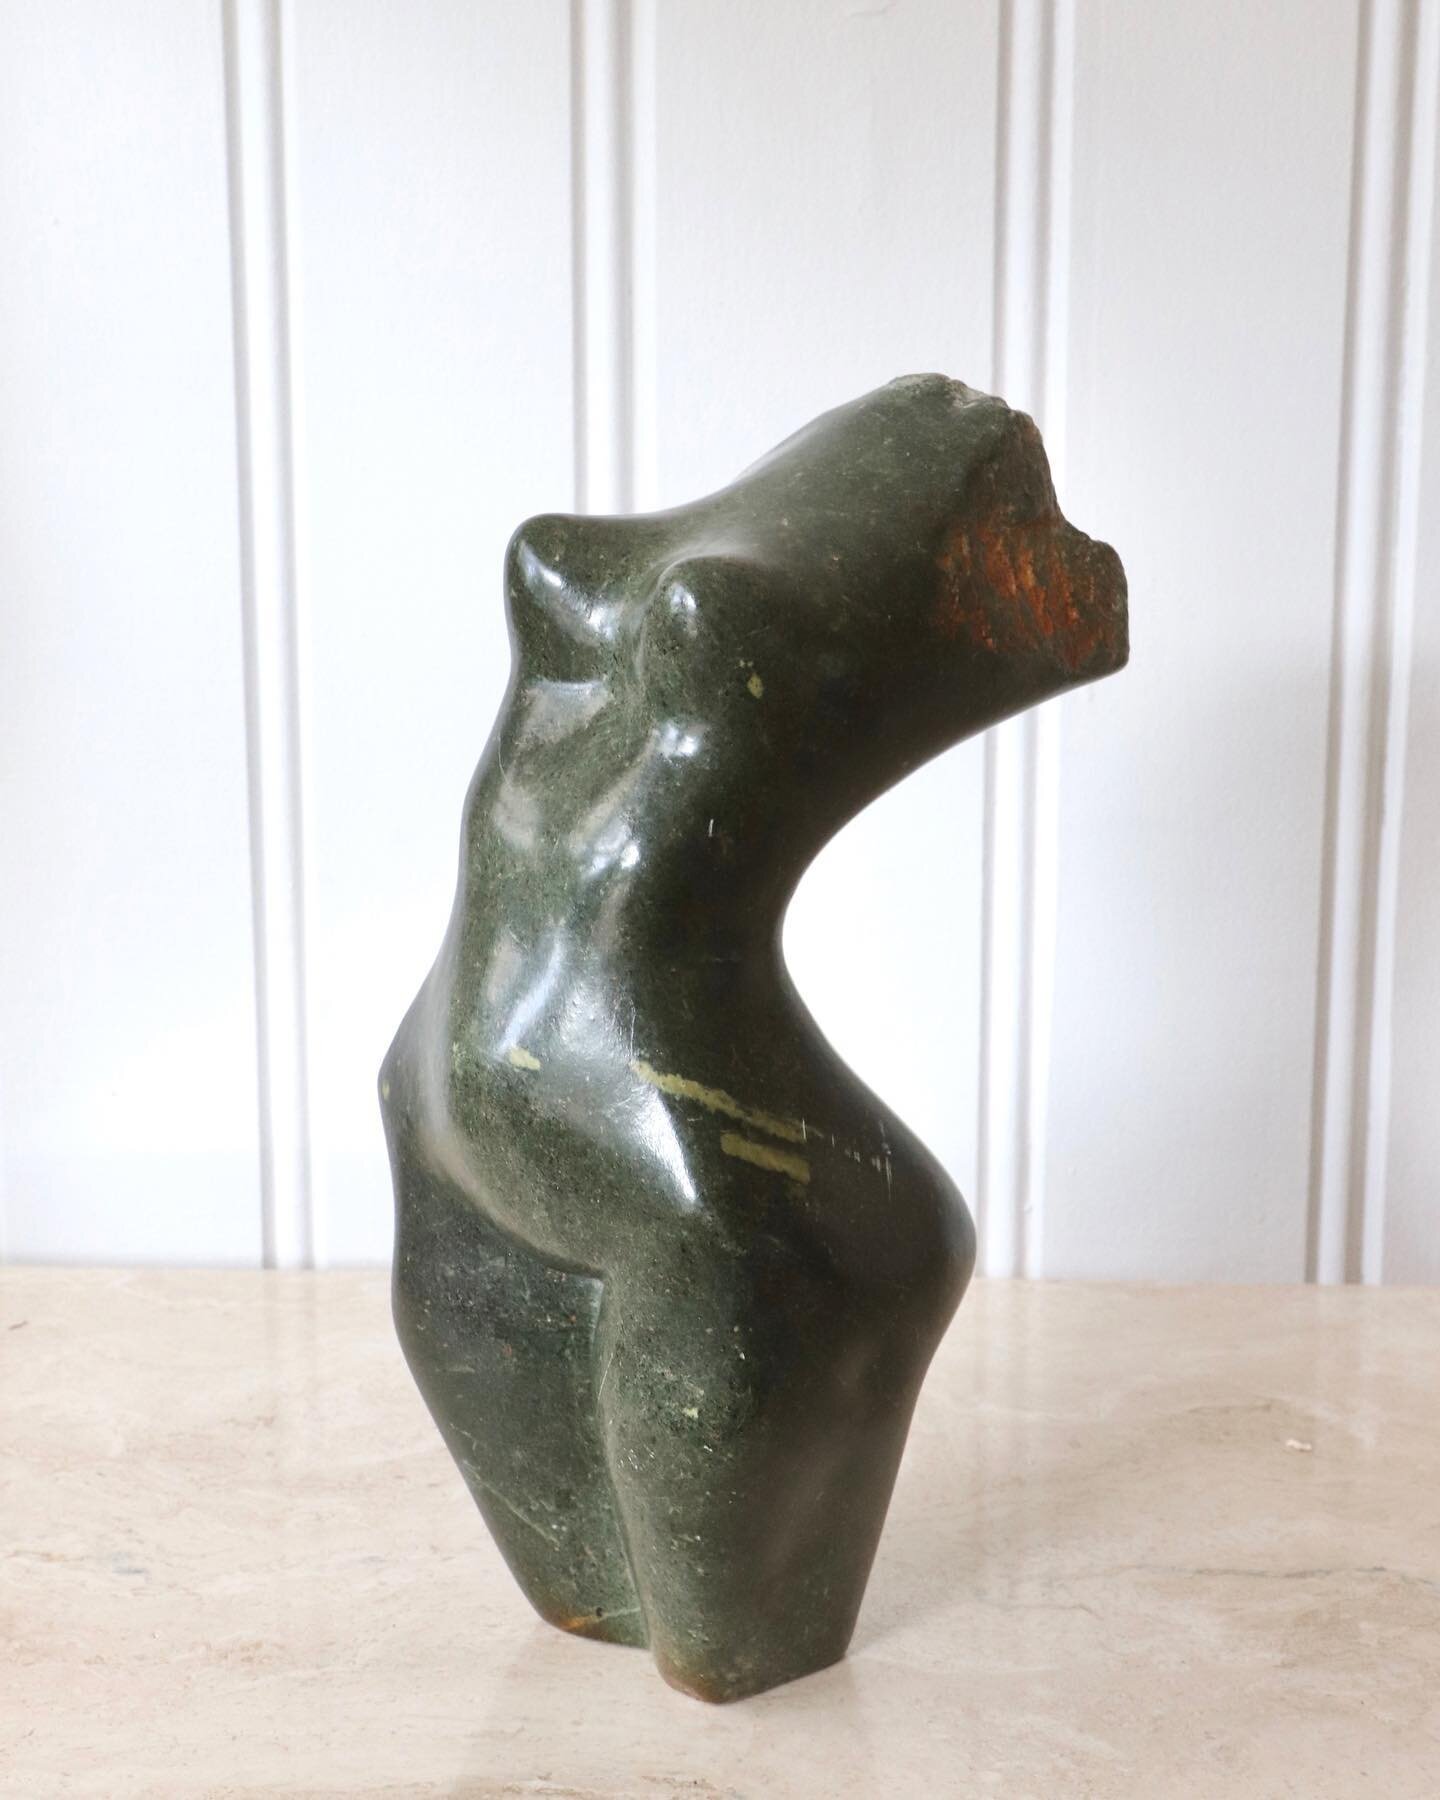 SOLD Large soapstone female torso sculpture measuring 14 inches tall and 7 inches wide. Can be styled in a variety of ways as seen. In good condition with wear consistent with age. $685

#interiordesign #homedecor #art #vintage